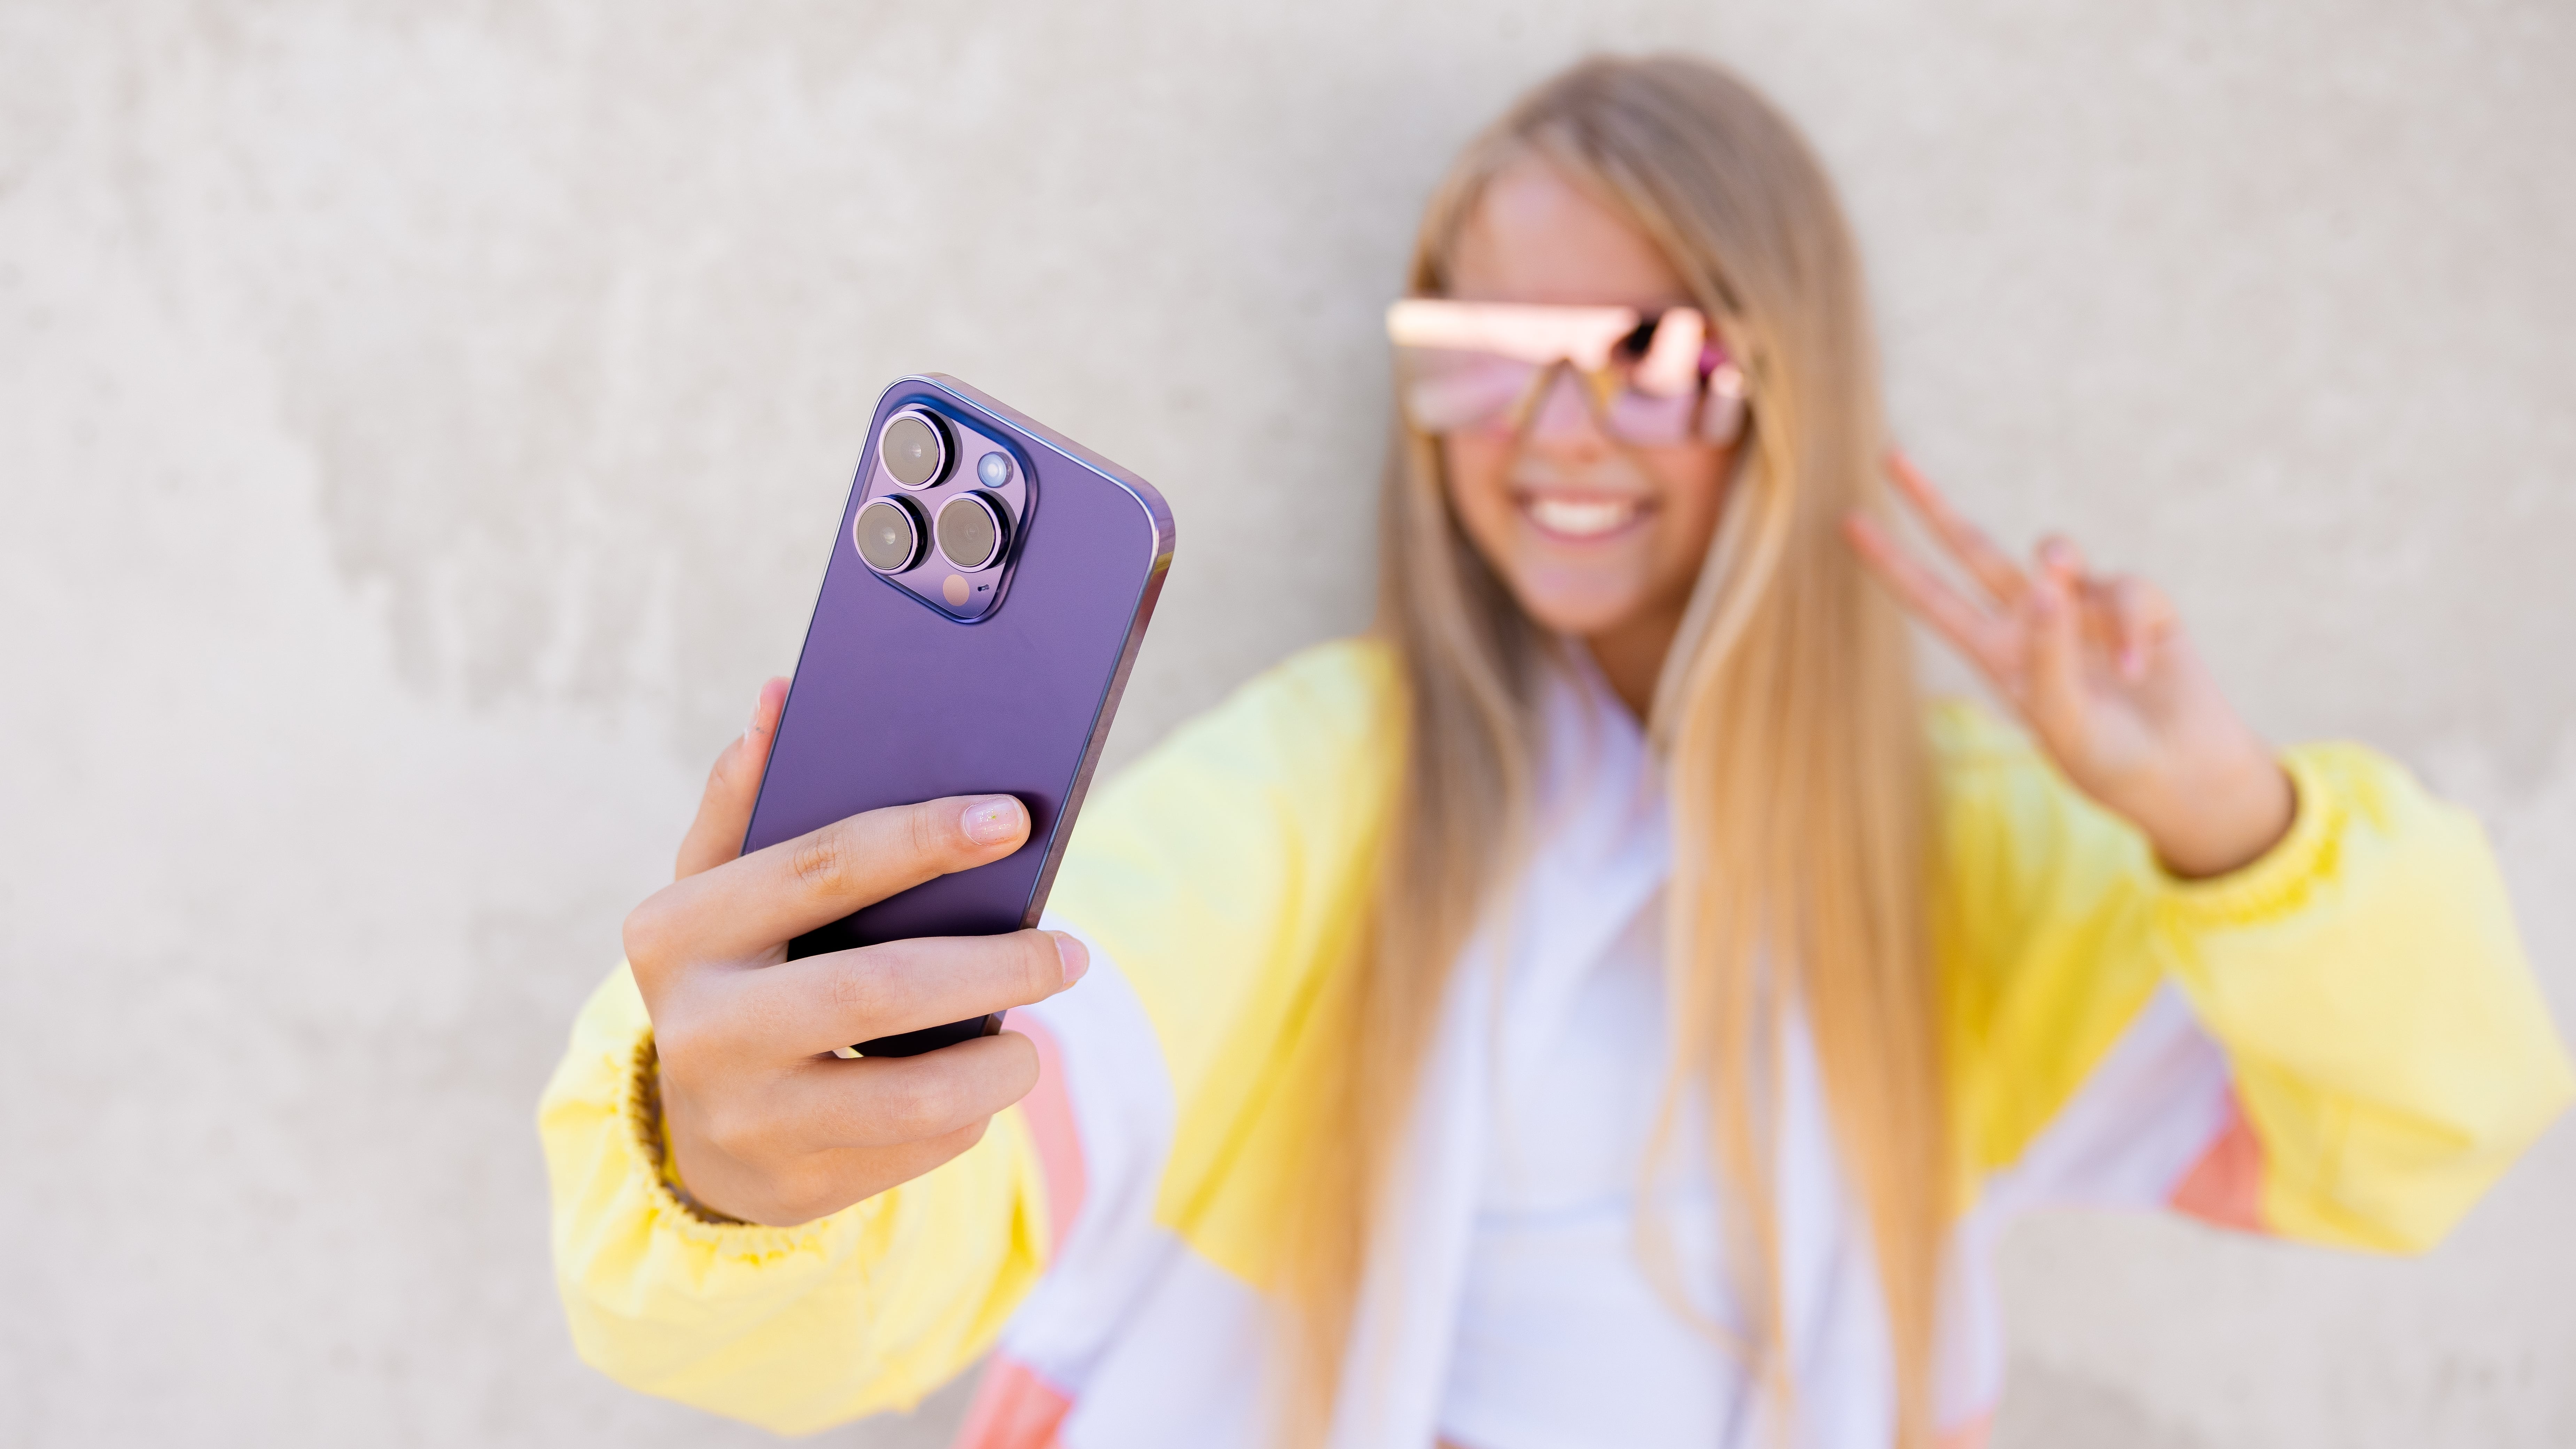 Young girl taking a selfie with an iPhone